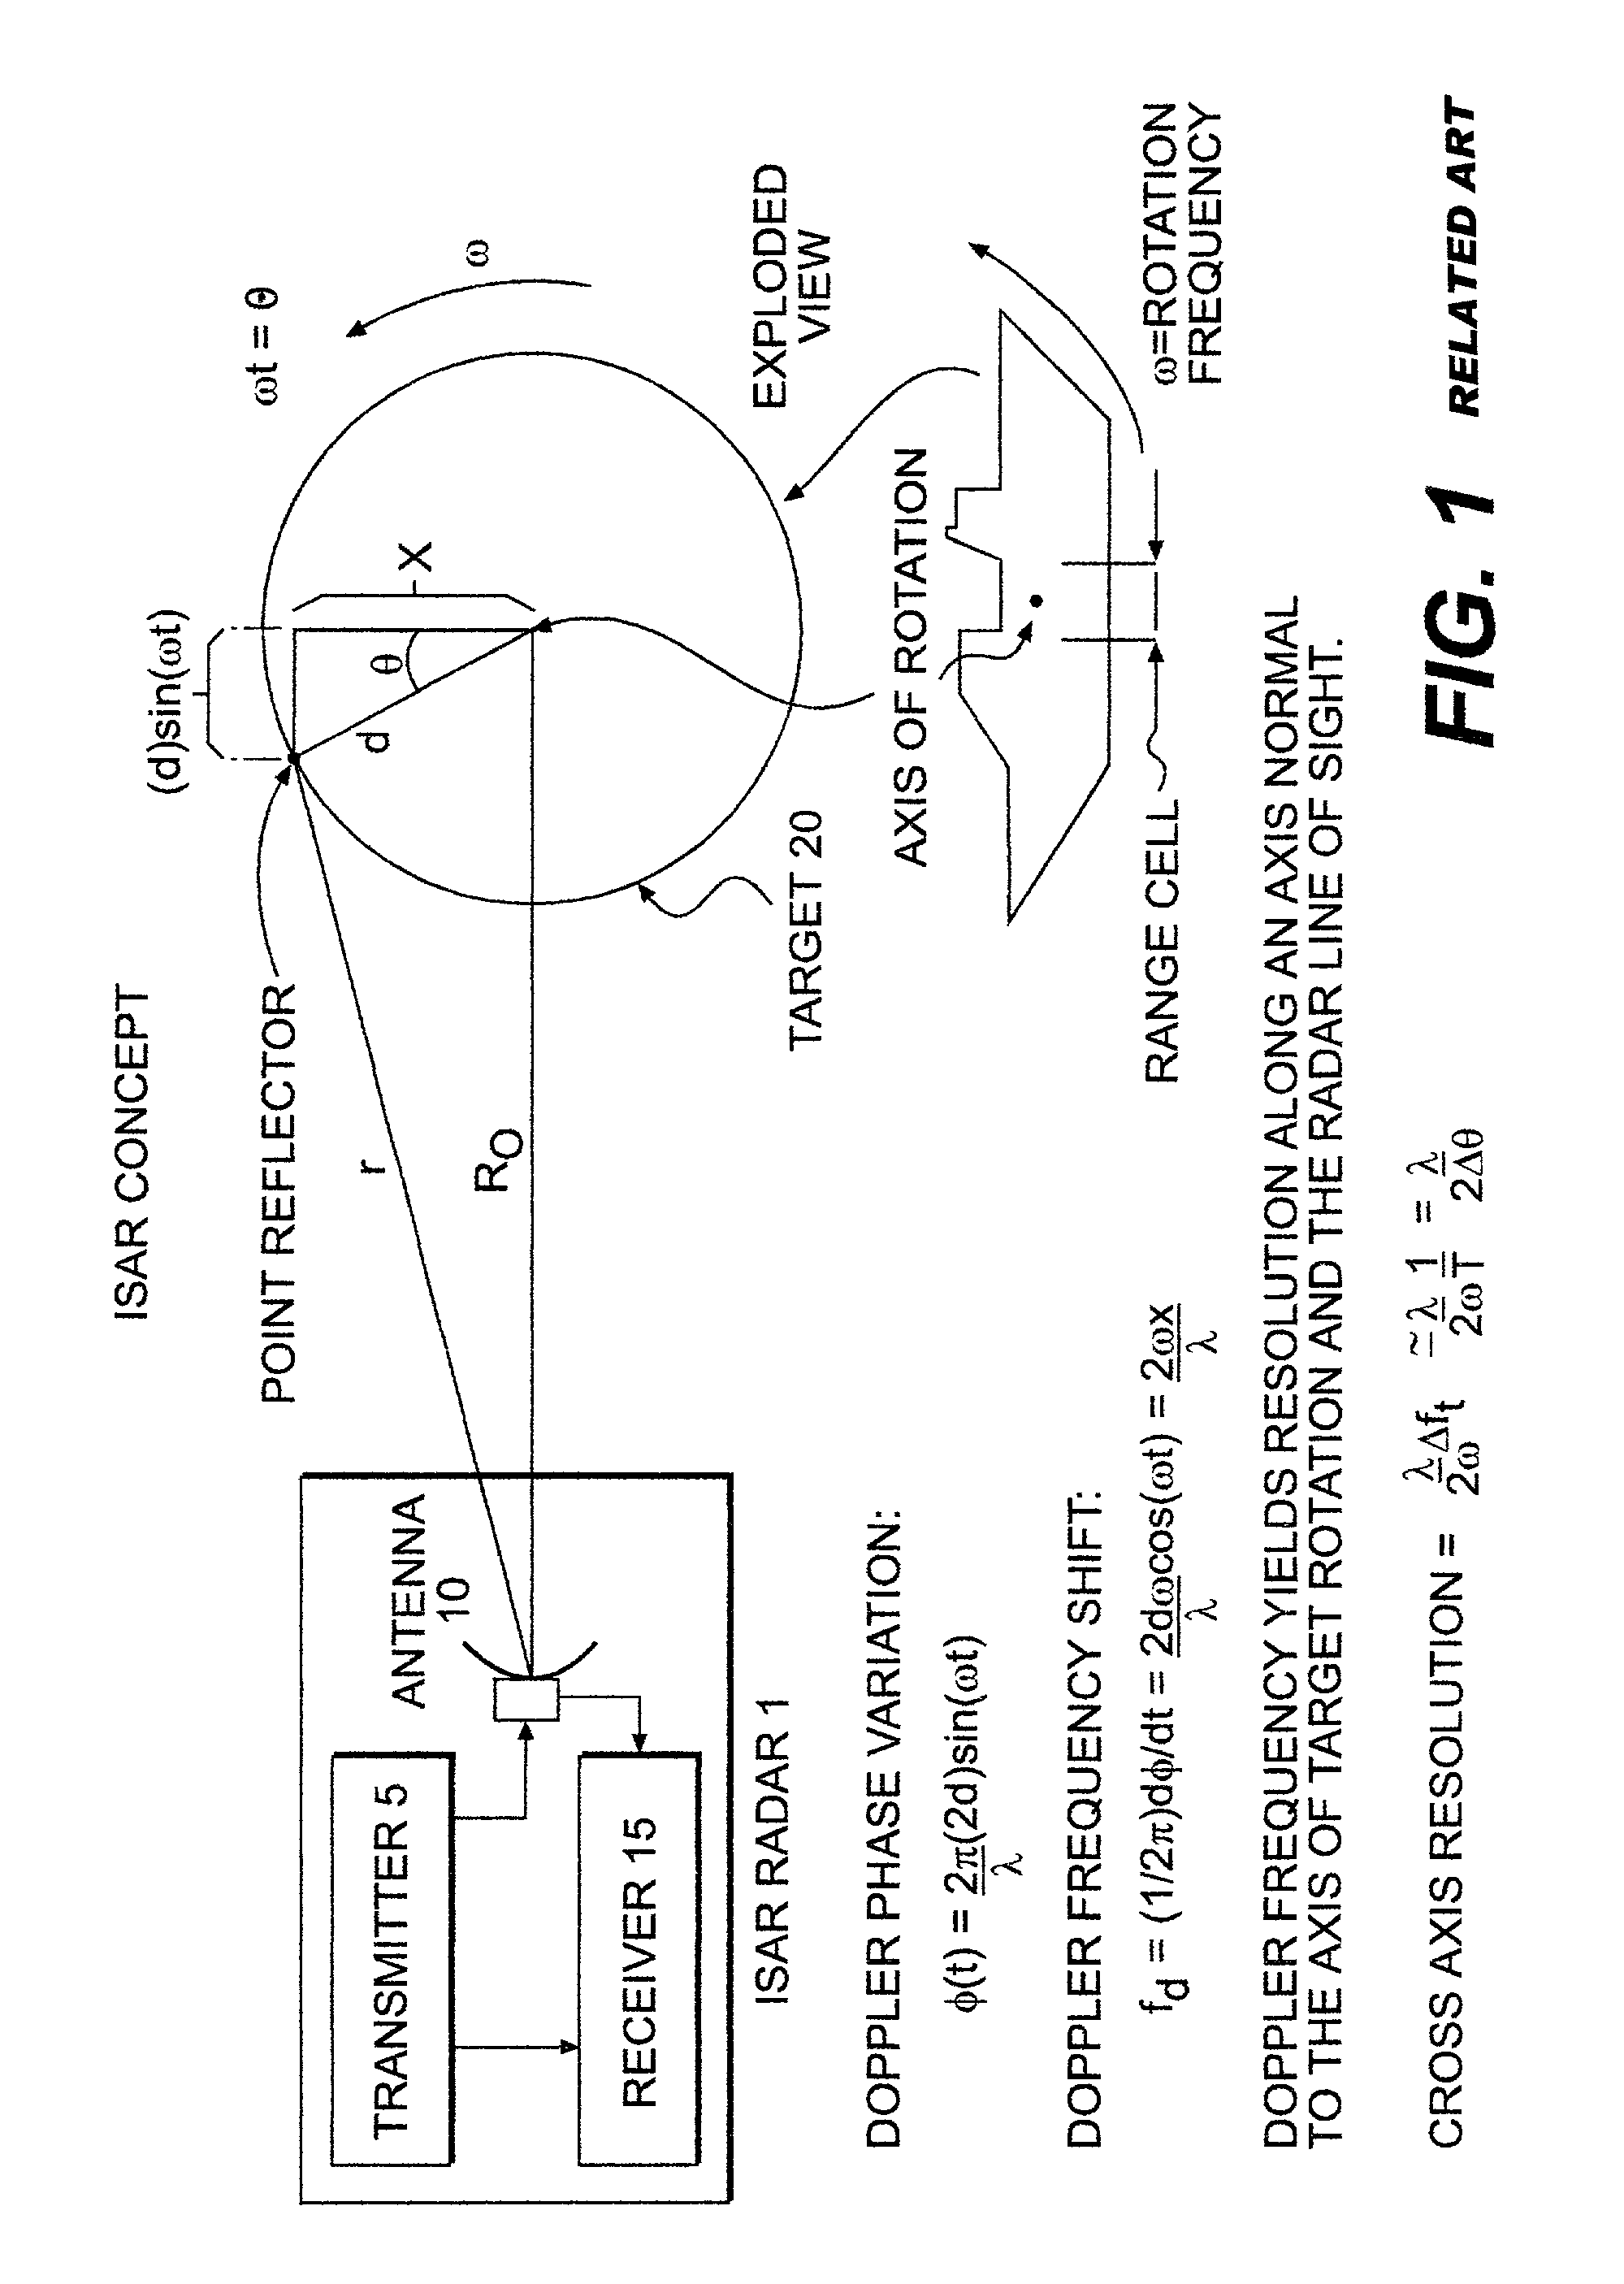 A-Scan ISAR classification system and method therefor